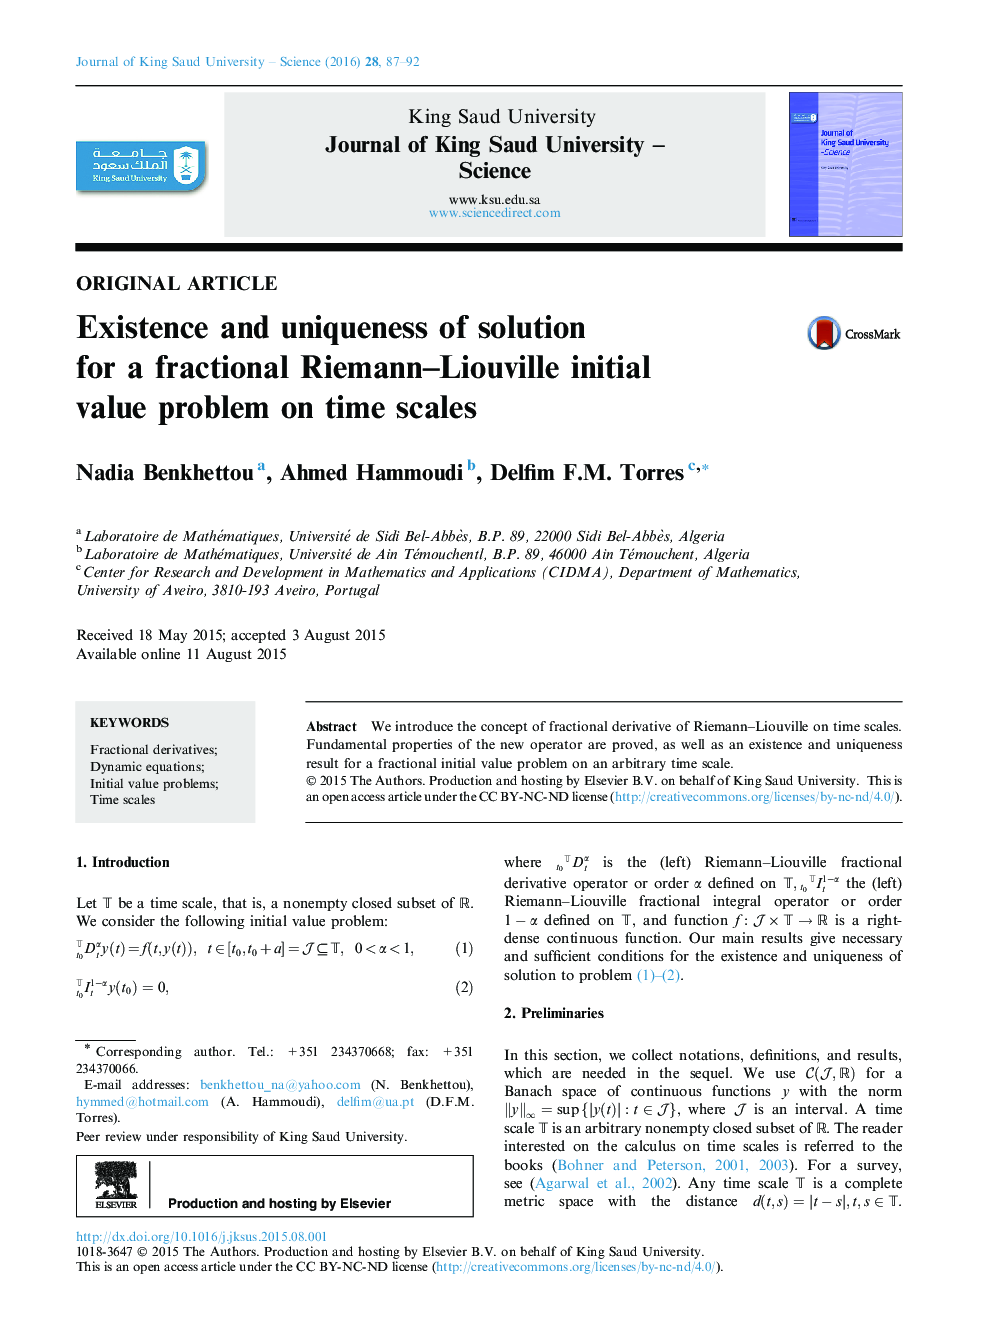 Existence and uniqueness of solution for a fractional Riemann–Liouville initial value problem on time scales 